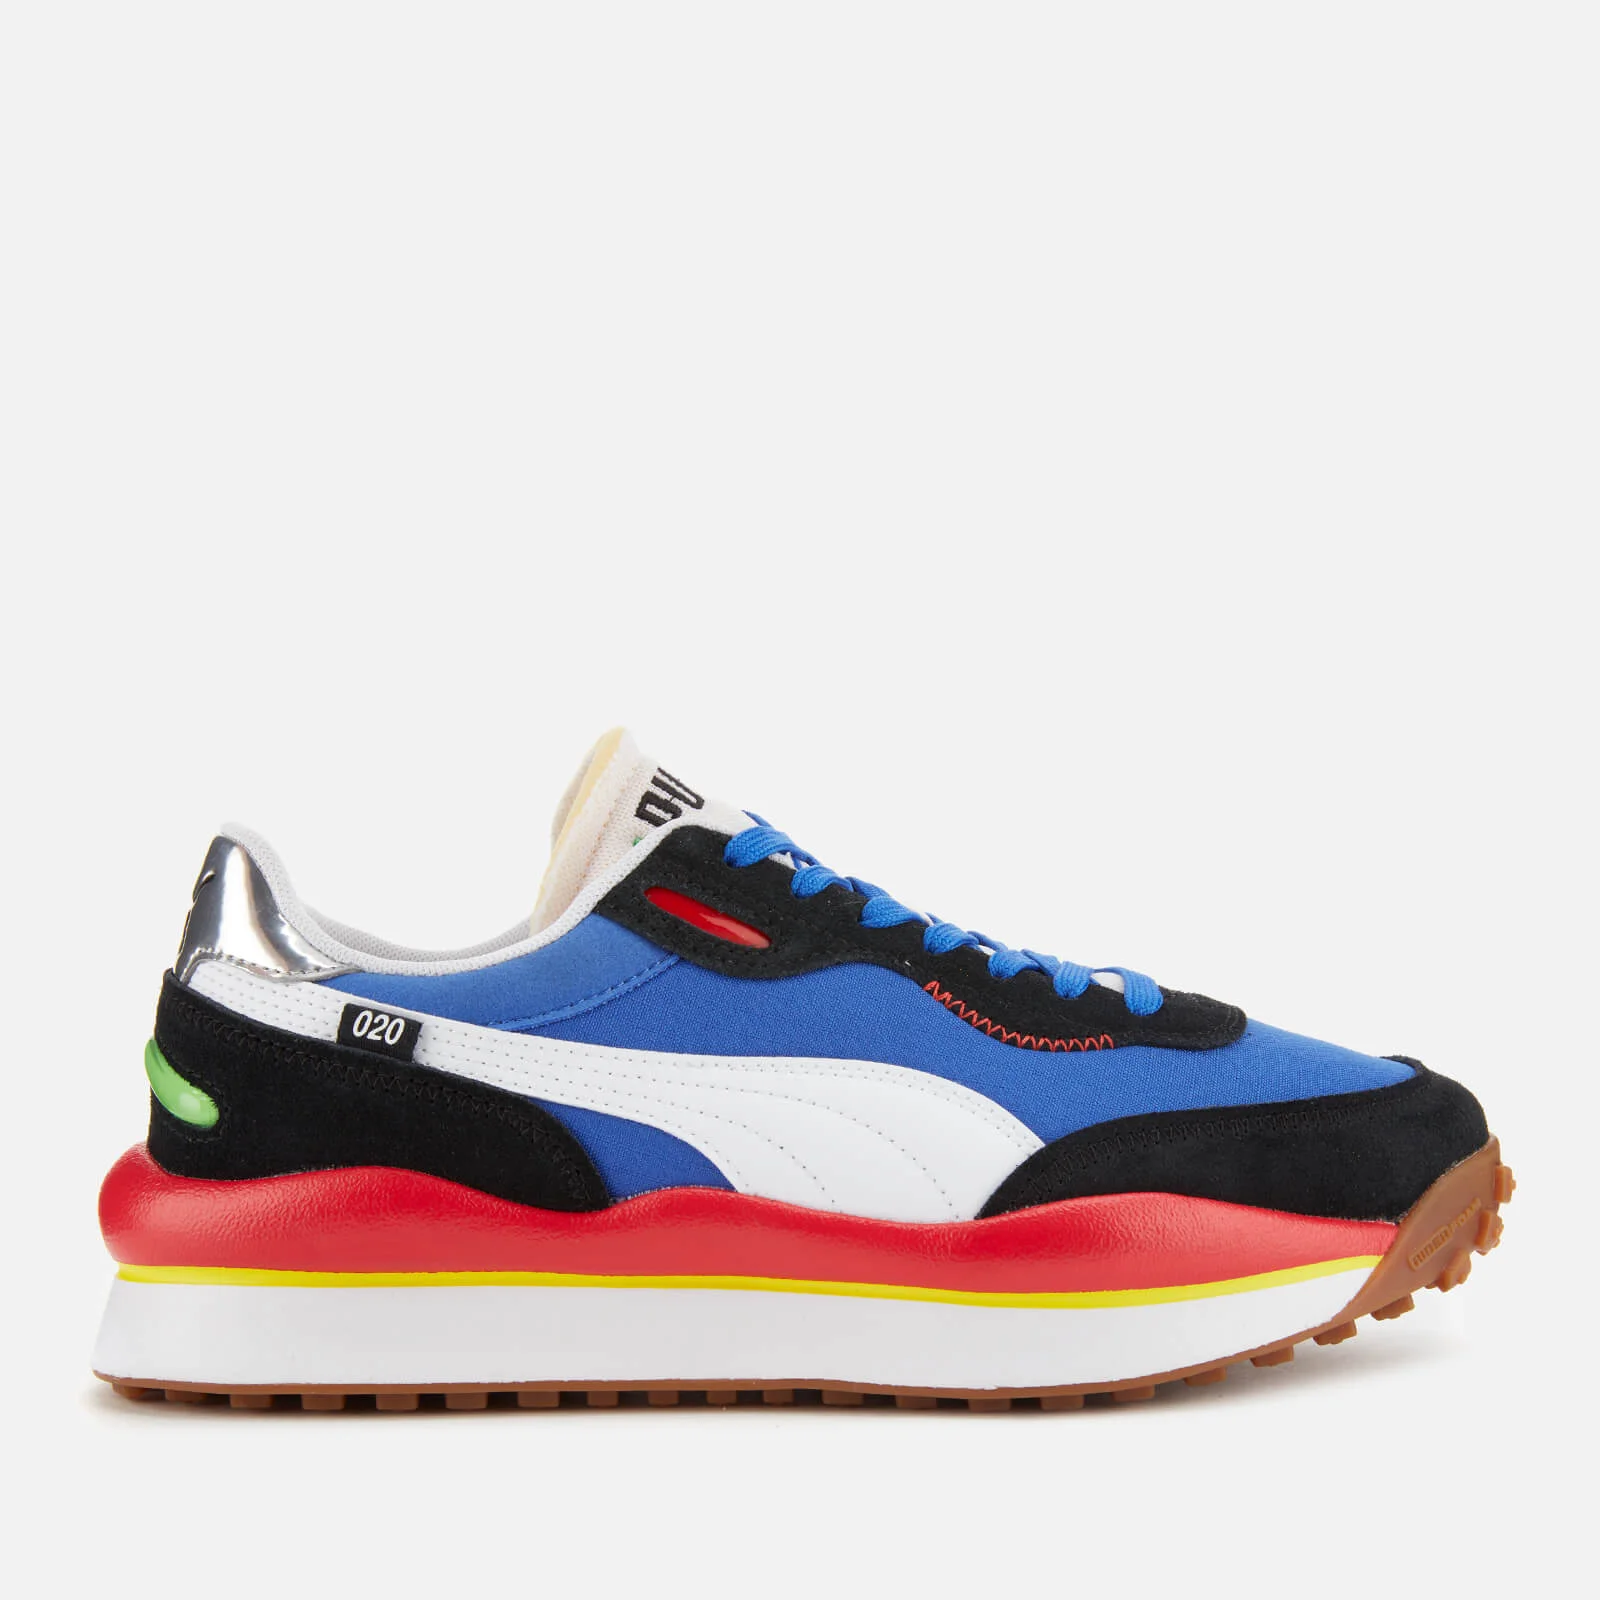 Puma Men's Style Ride Game On Trainers - Multi Image 1